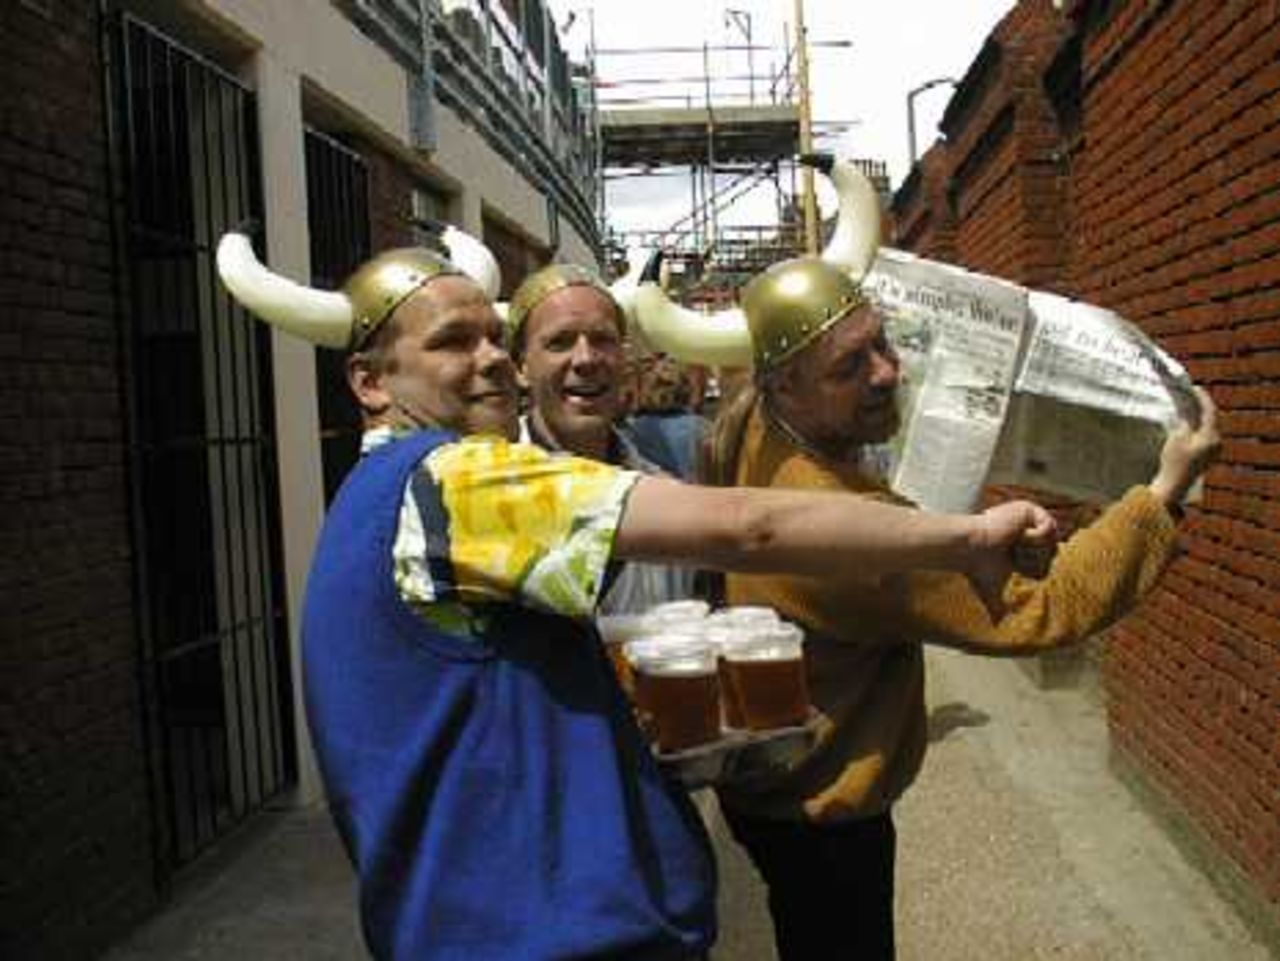 More fans at the Oval wearing horns and ready for beer! at the 4 June 1999 match against Australia, WC99